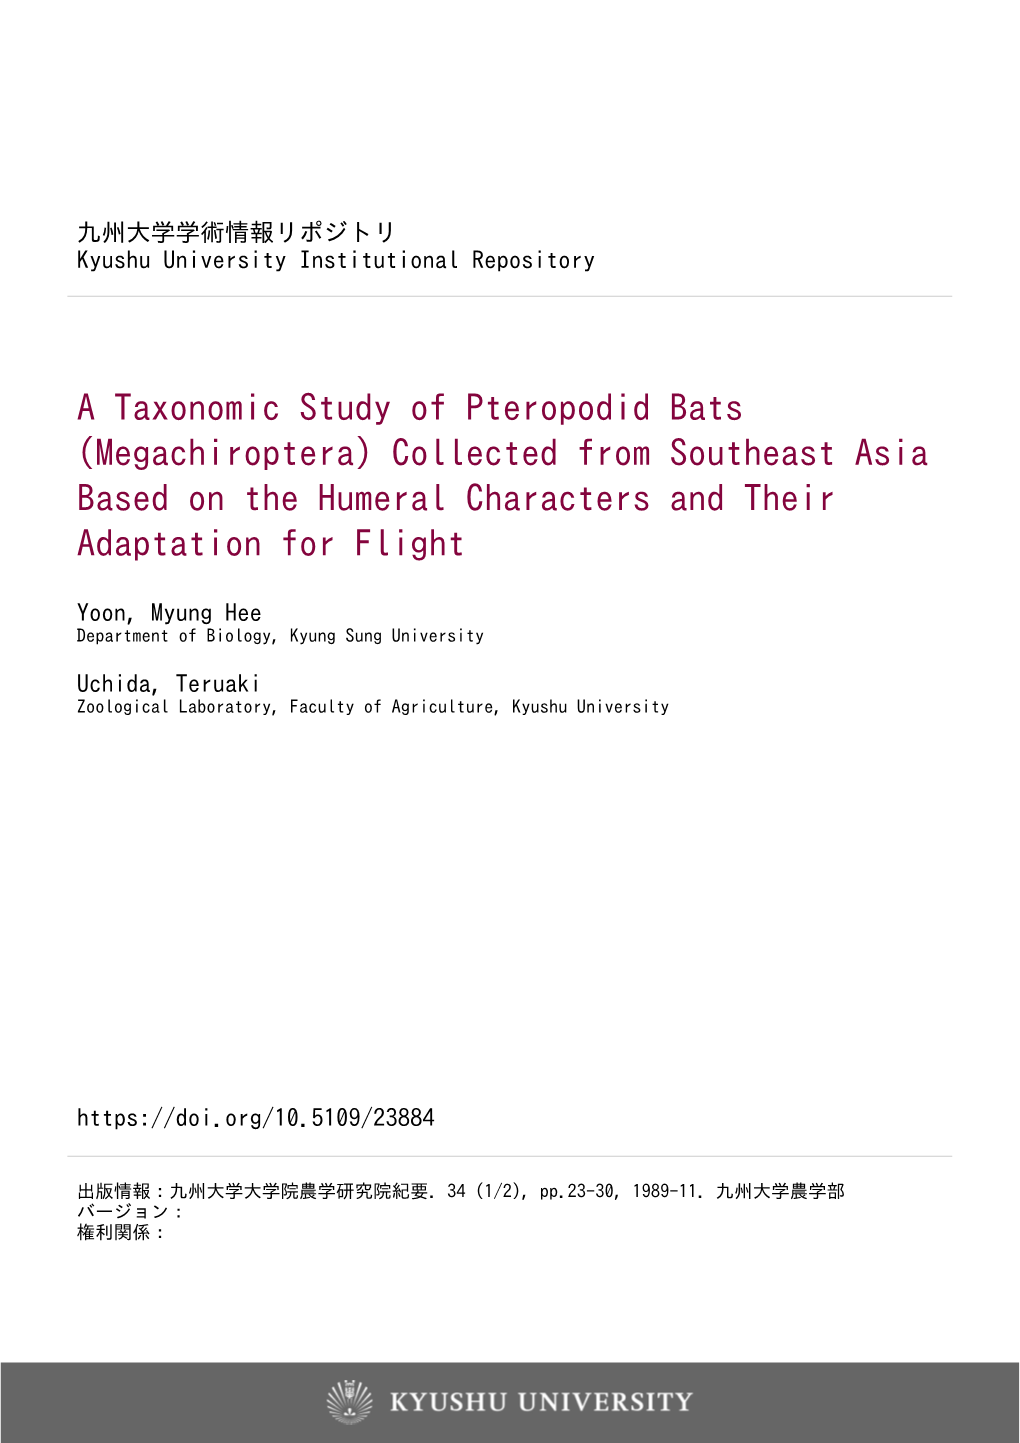 A Taxonomic Study of Pteropodid Bats (Megachiroptera) Collected from Southeast Asia Based on the Humeral Characters and Their Adaptation for Flight